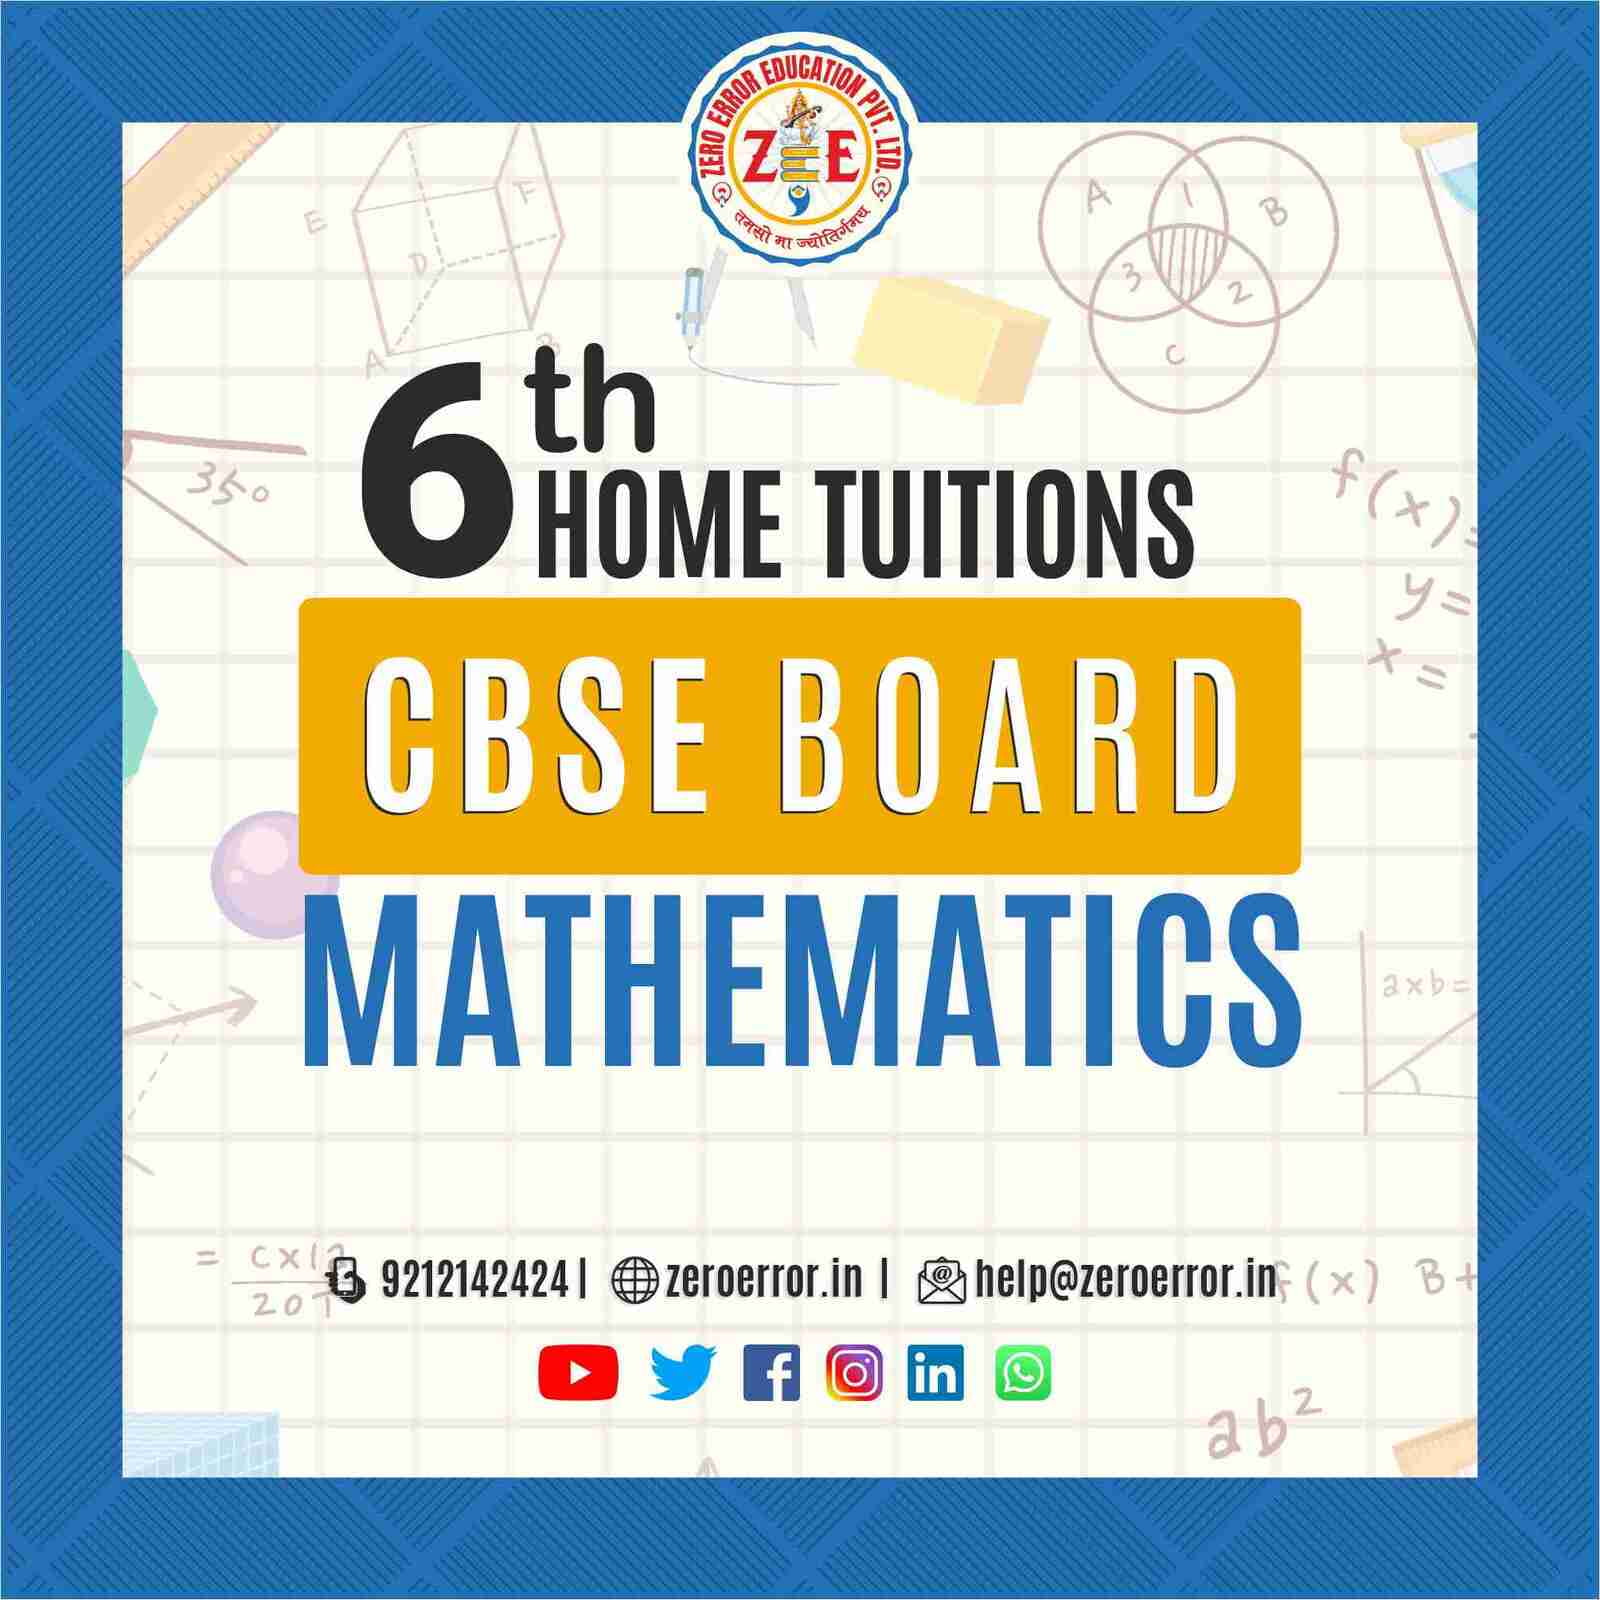 6th Grade CBSE Math's Online Classes by Zero Error Education Prepare for your CBSE board exams with online and offline Math's classes for 6th grade. Learn from experienced home tutors and get all the help you need to succeed. Enroll today at Zero Error Education. [https://zeroerror.in/] Call 9212142424 for more information.